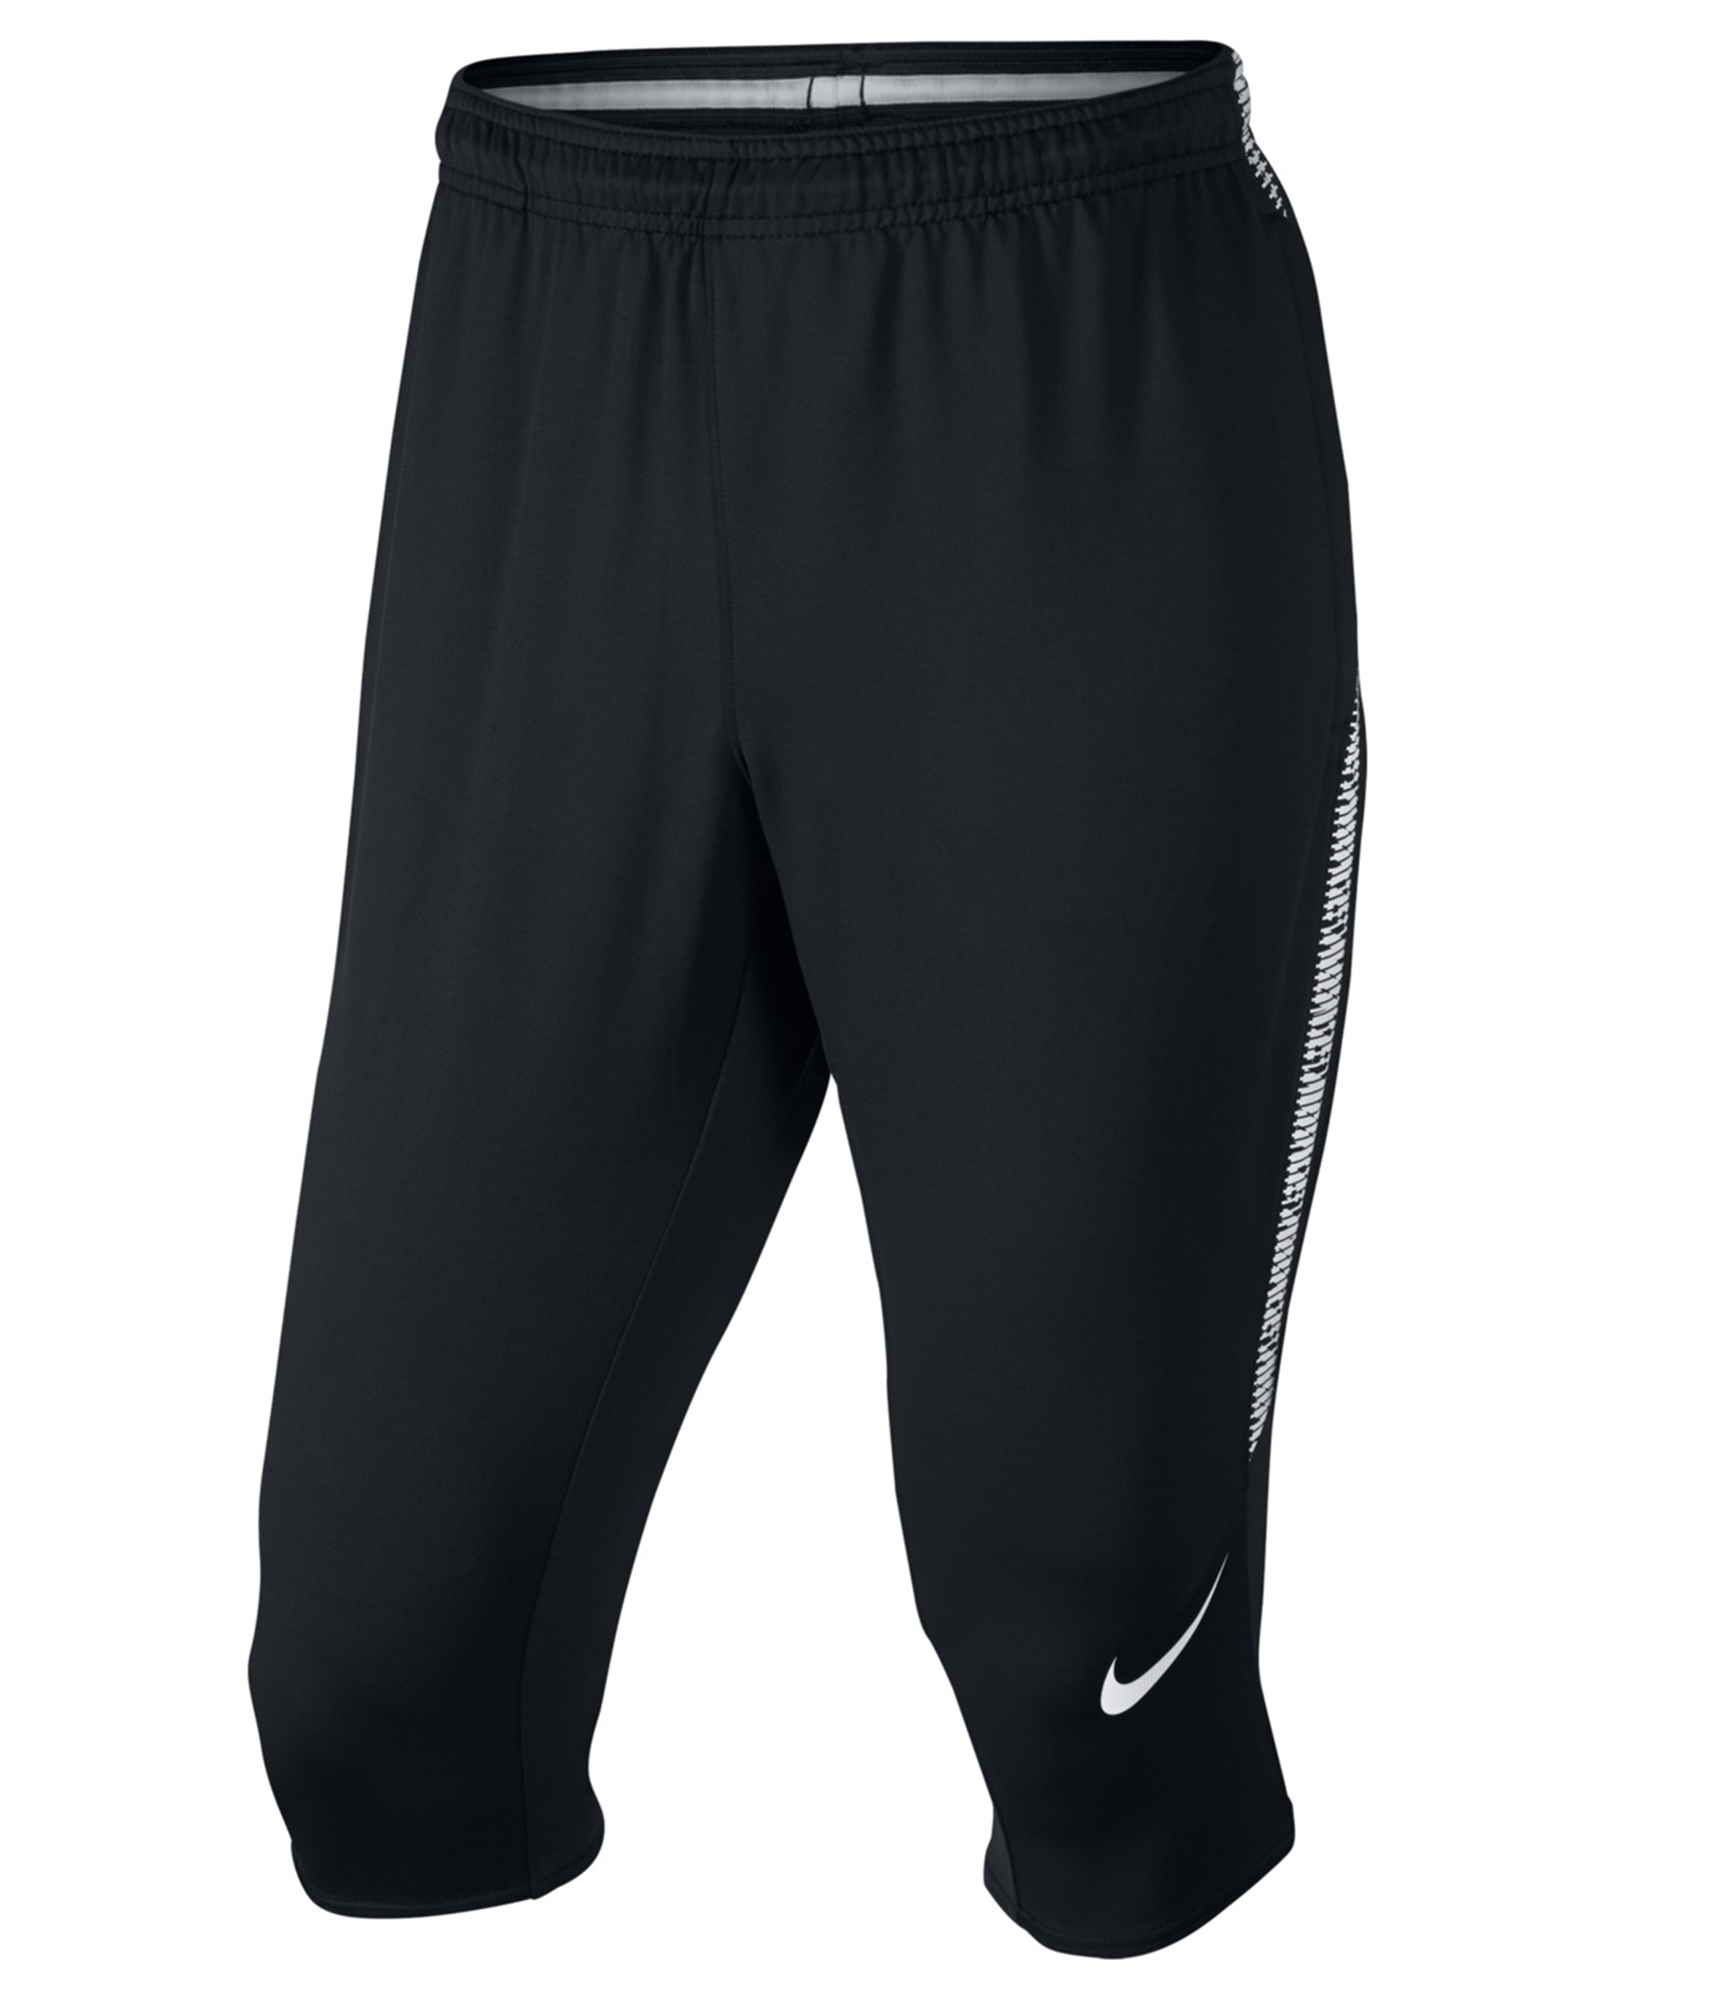 Frons beu roltrap Buy a Mens Nike Dry Squad 3/4 Soccer Athletic Track Pants Online |  TagsWeekly.com